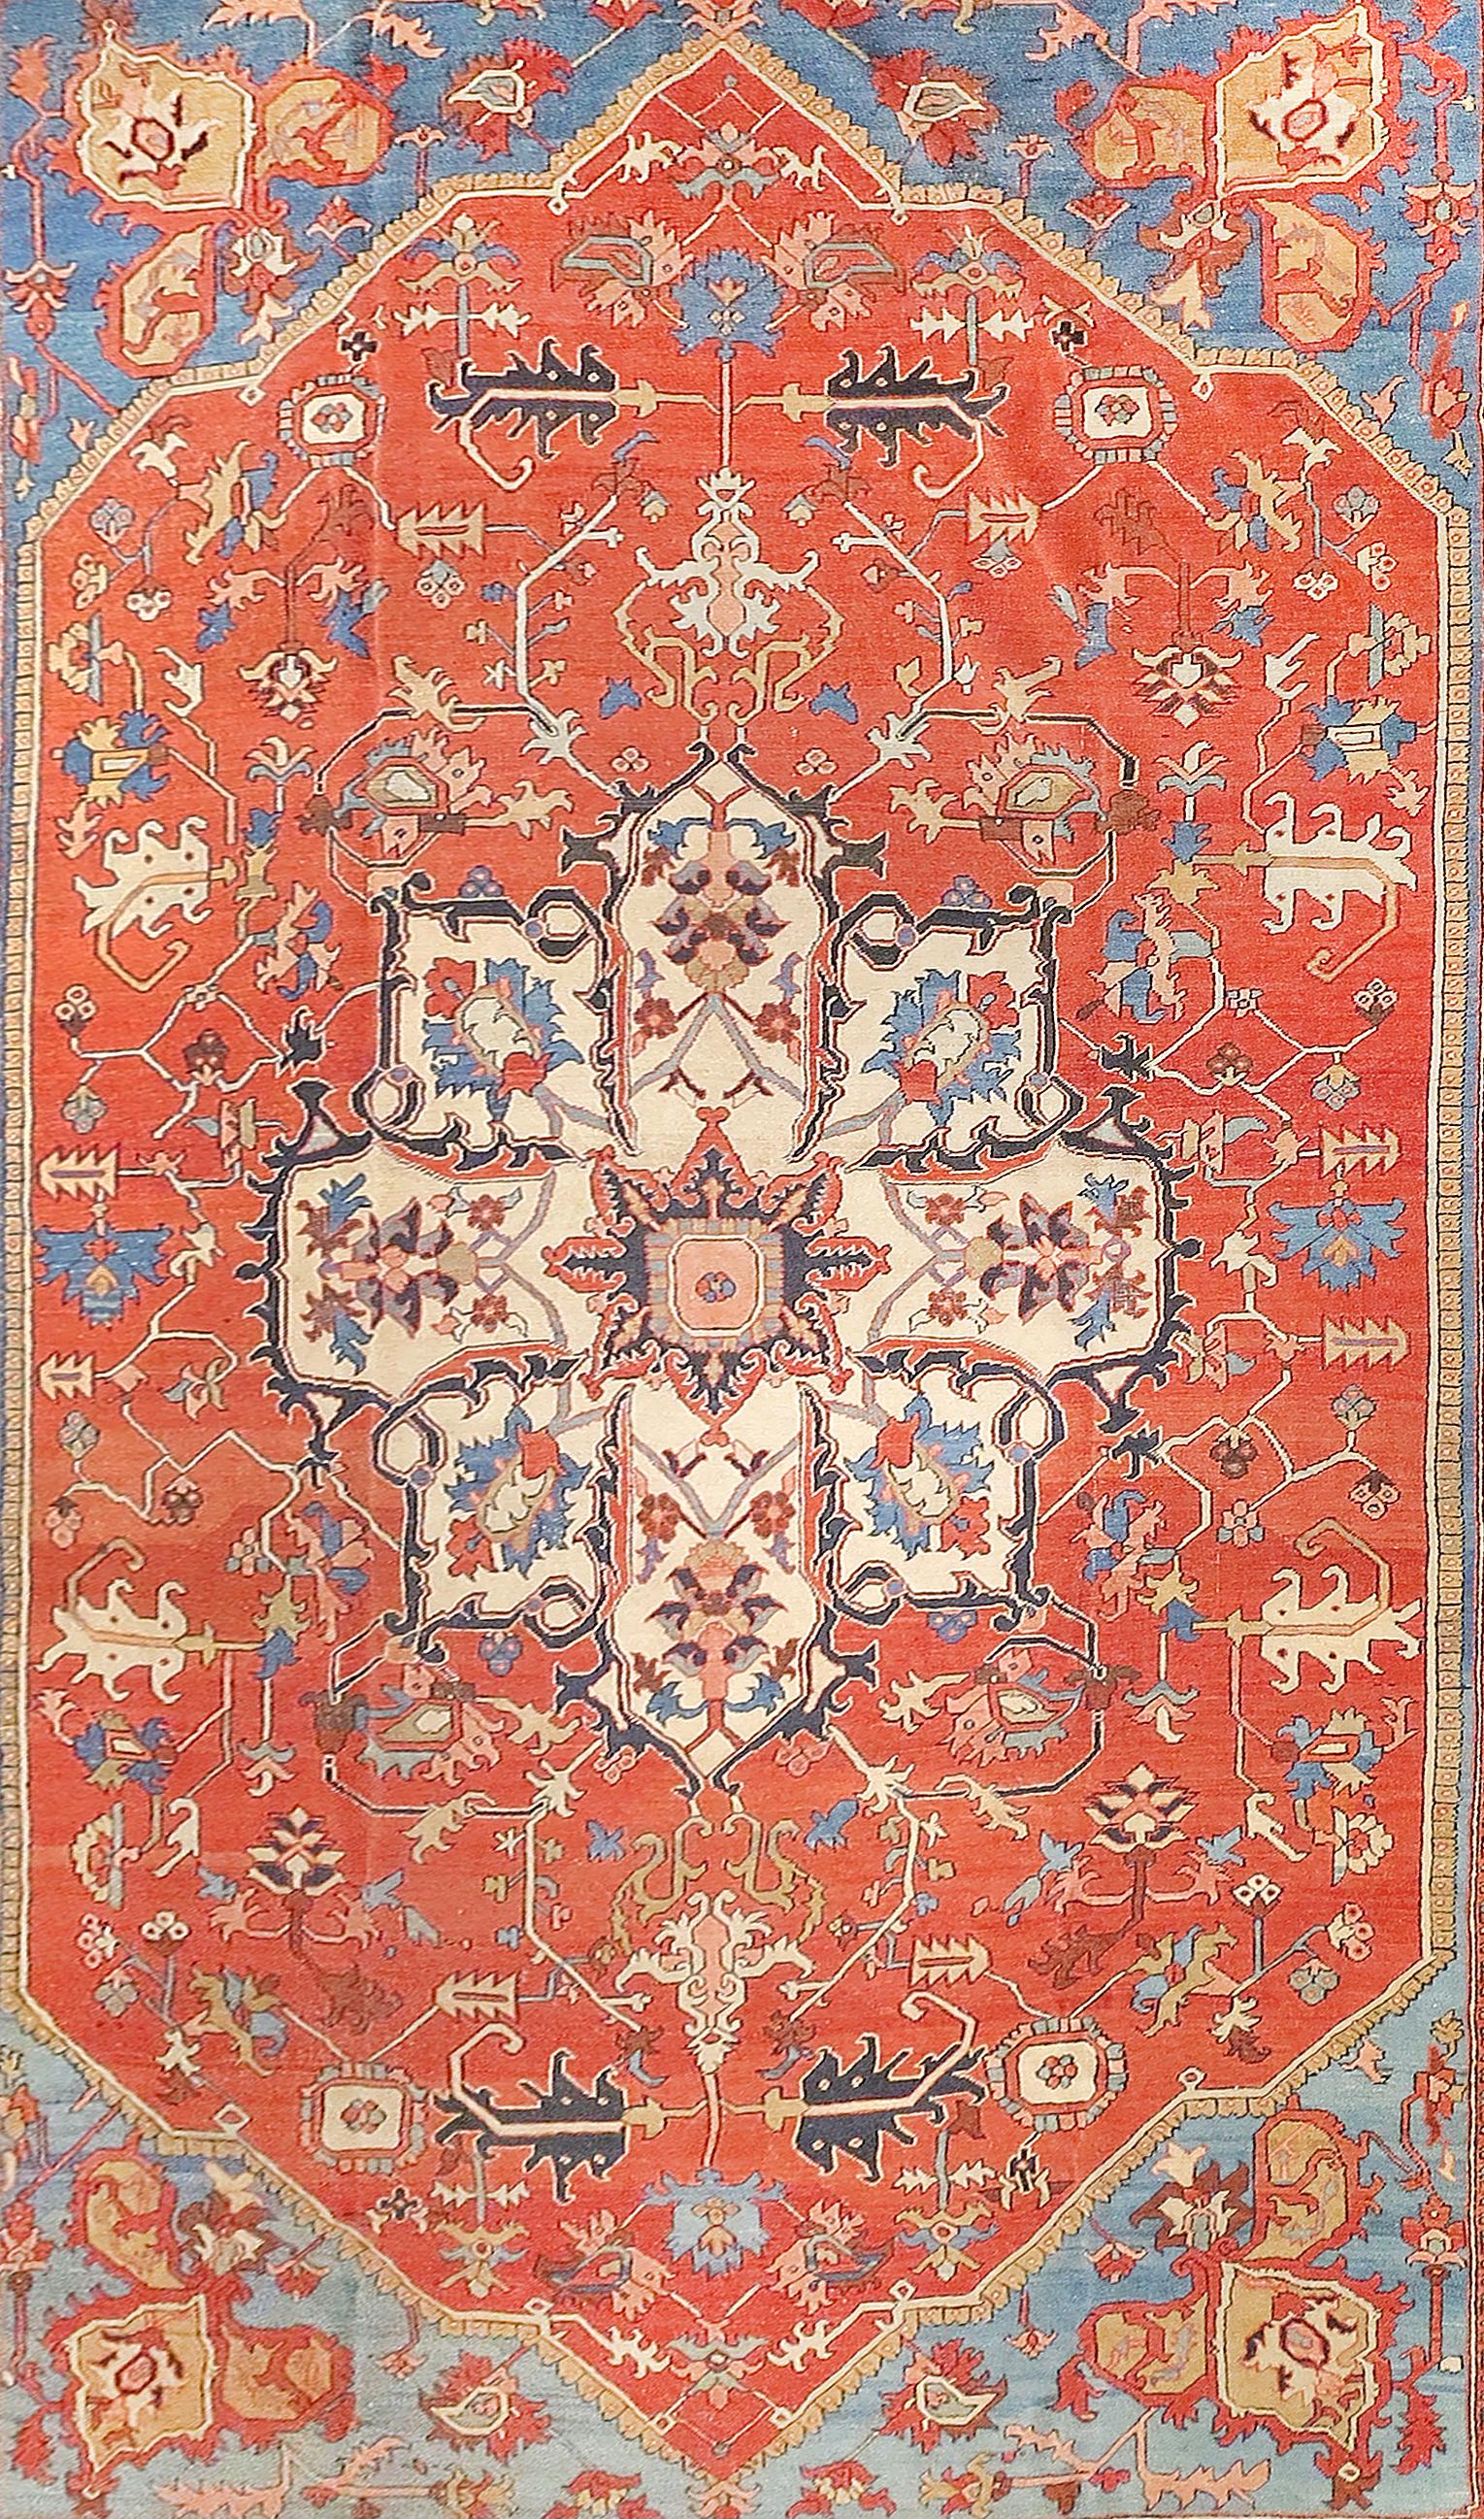 Extremly fine antique Persian Bakshayesh rug, hand knotted, circa 1890
Design: Center floral medalion

Bakshayesh is a small village in the Iranian Azerbaijan region, located southwest of Heriz. The area is mostly known for its late 19th century